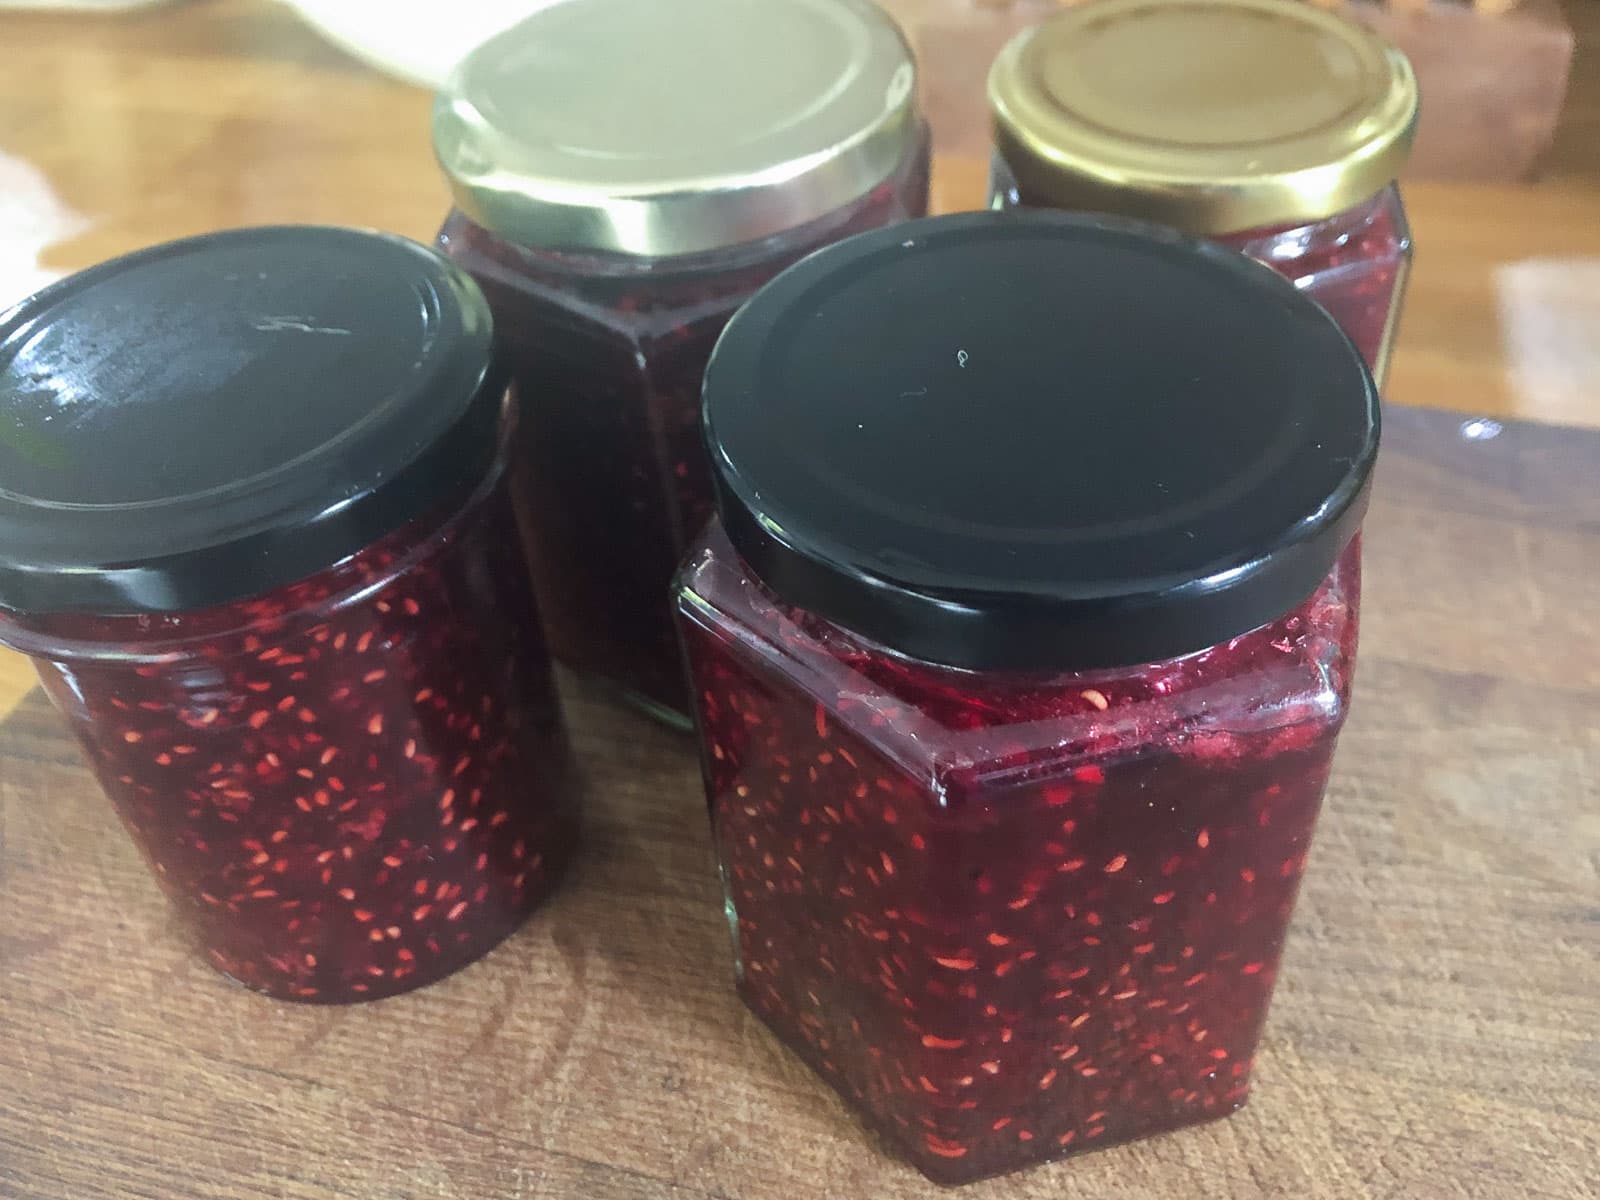 four jars of fresh homemade raspberry jam sitting on a wooden chopping board.